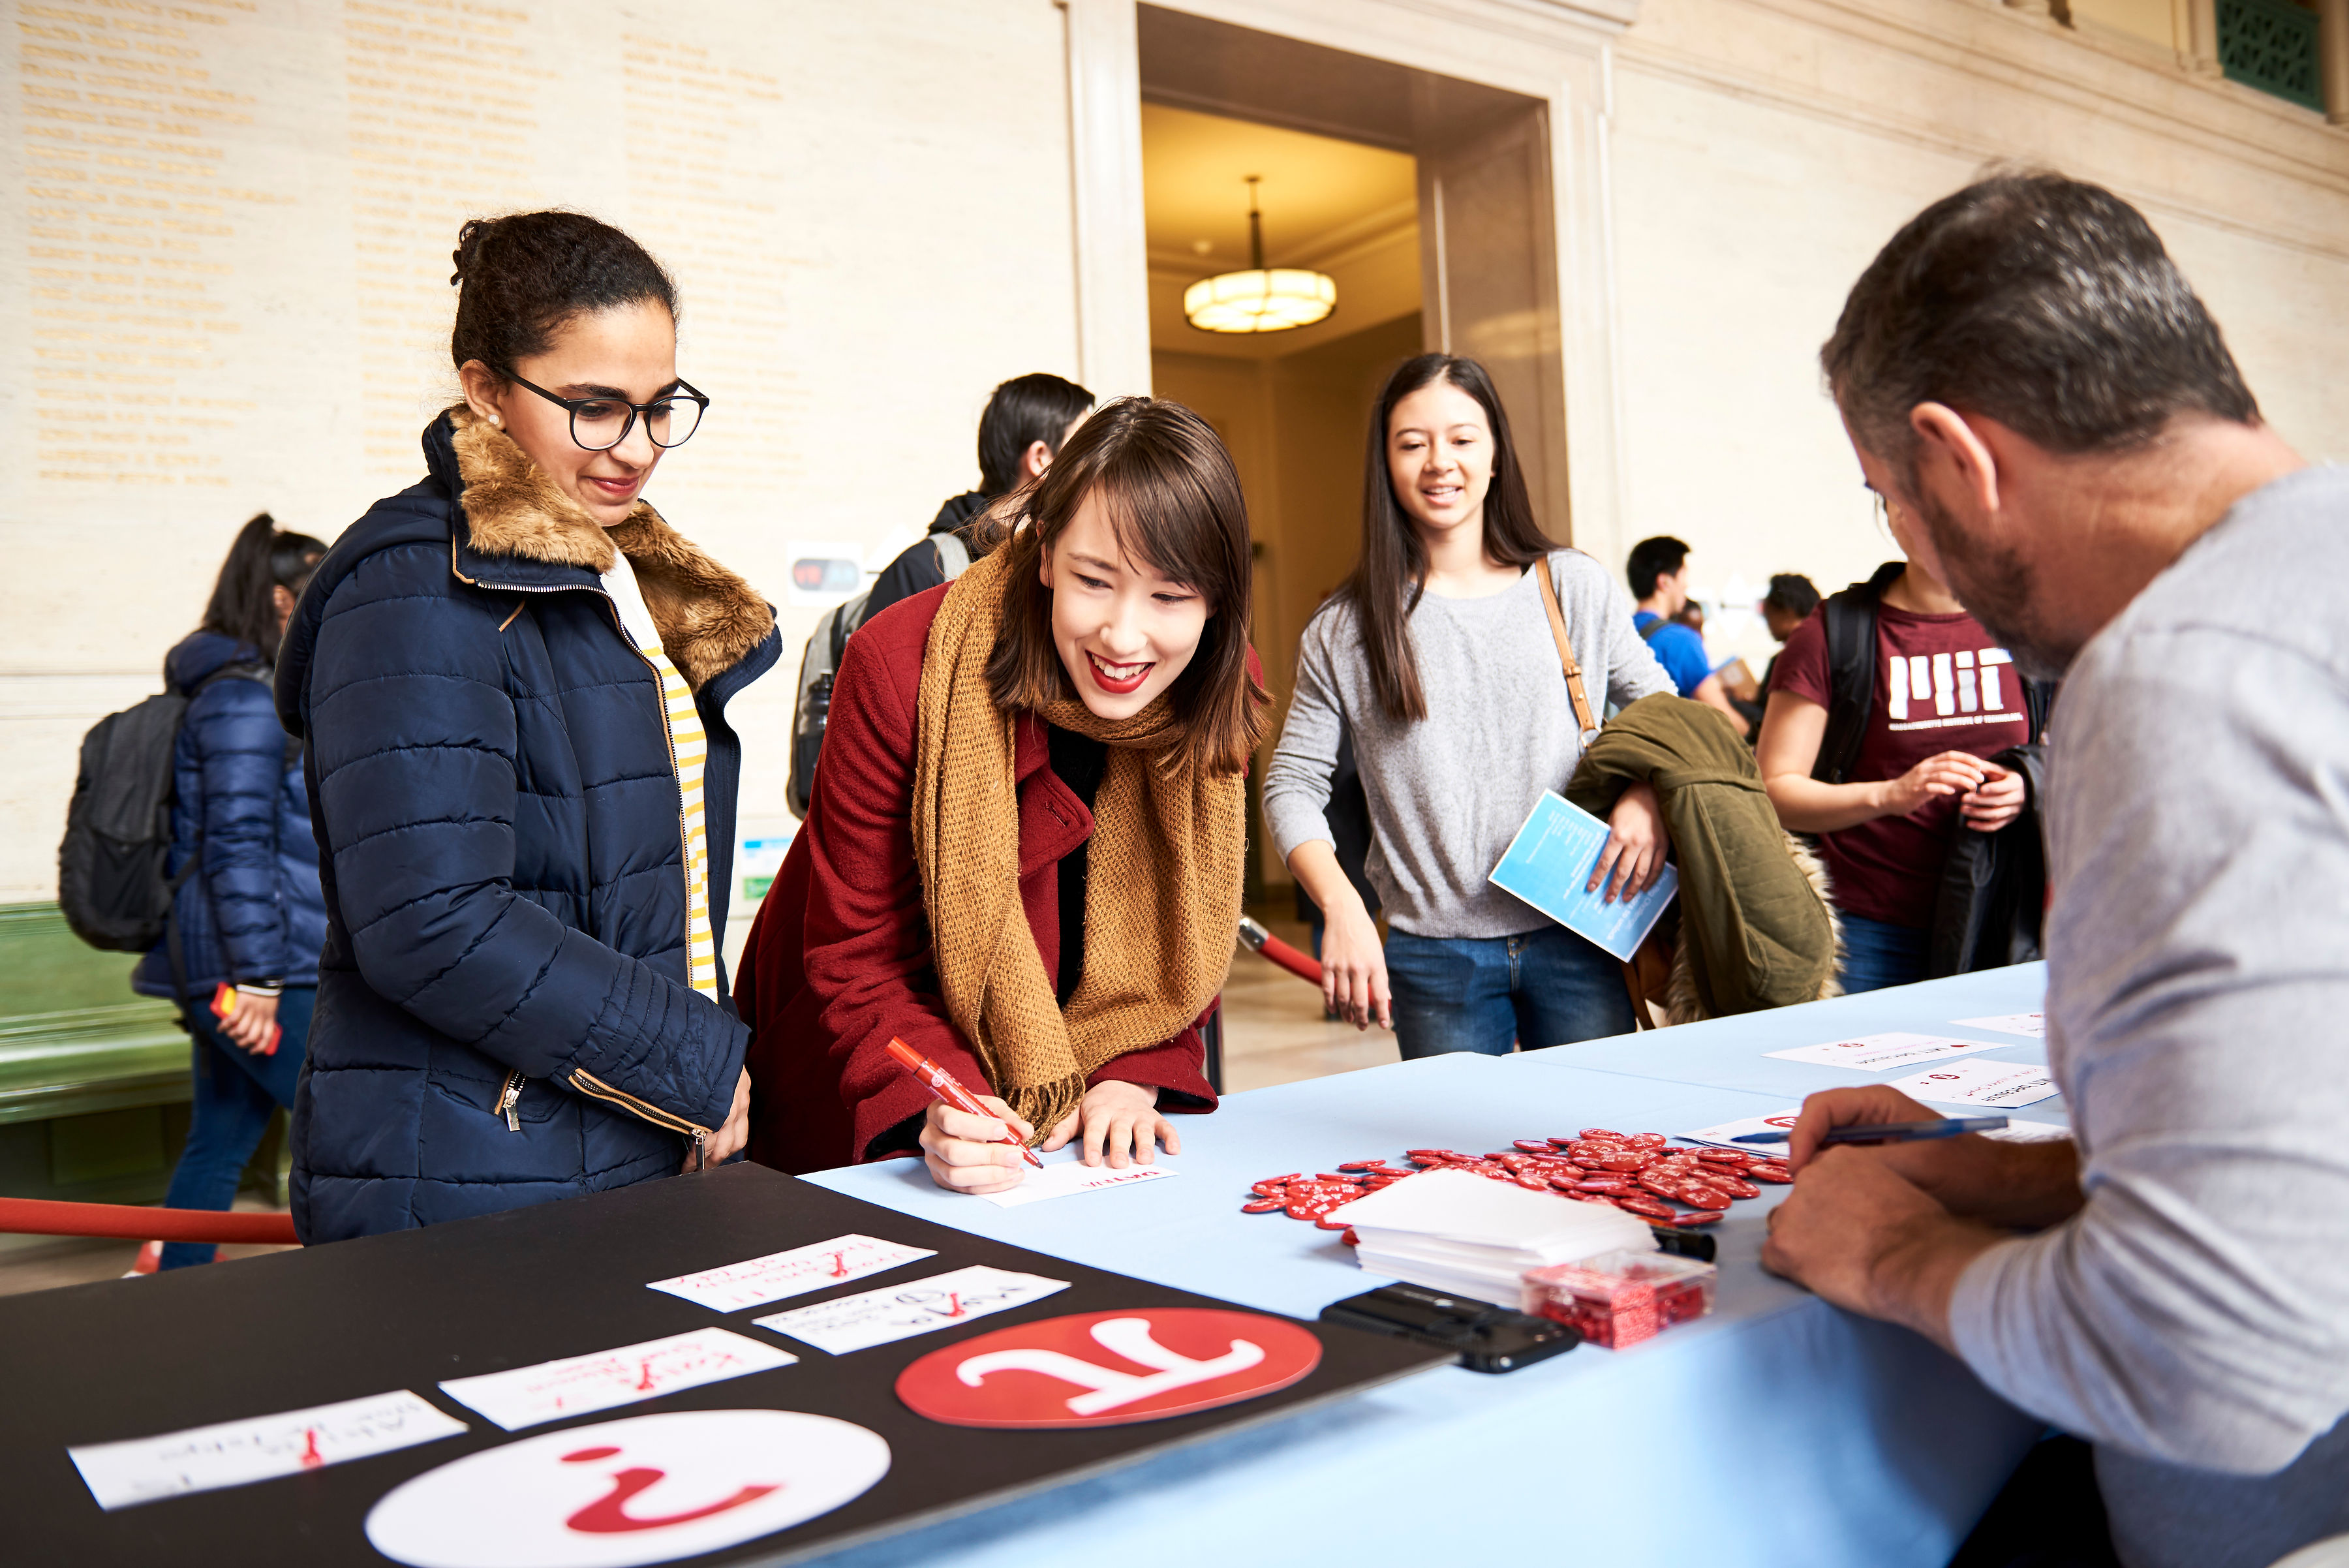 Celebrations in Lobby 10 during the 2019 MIT 24-Hour Challenge.